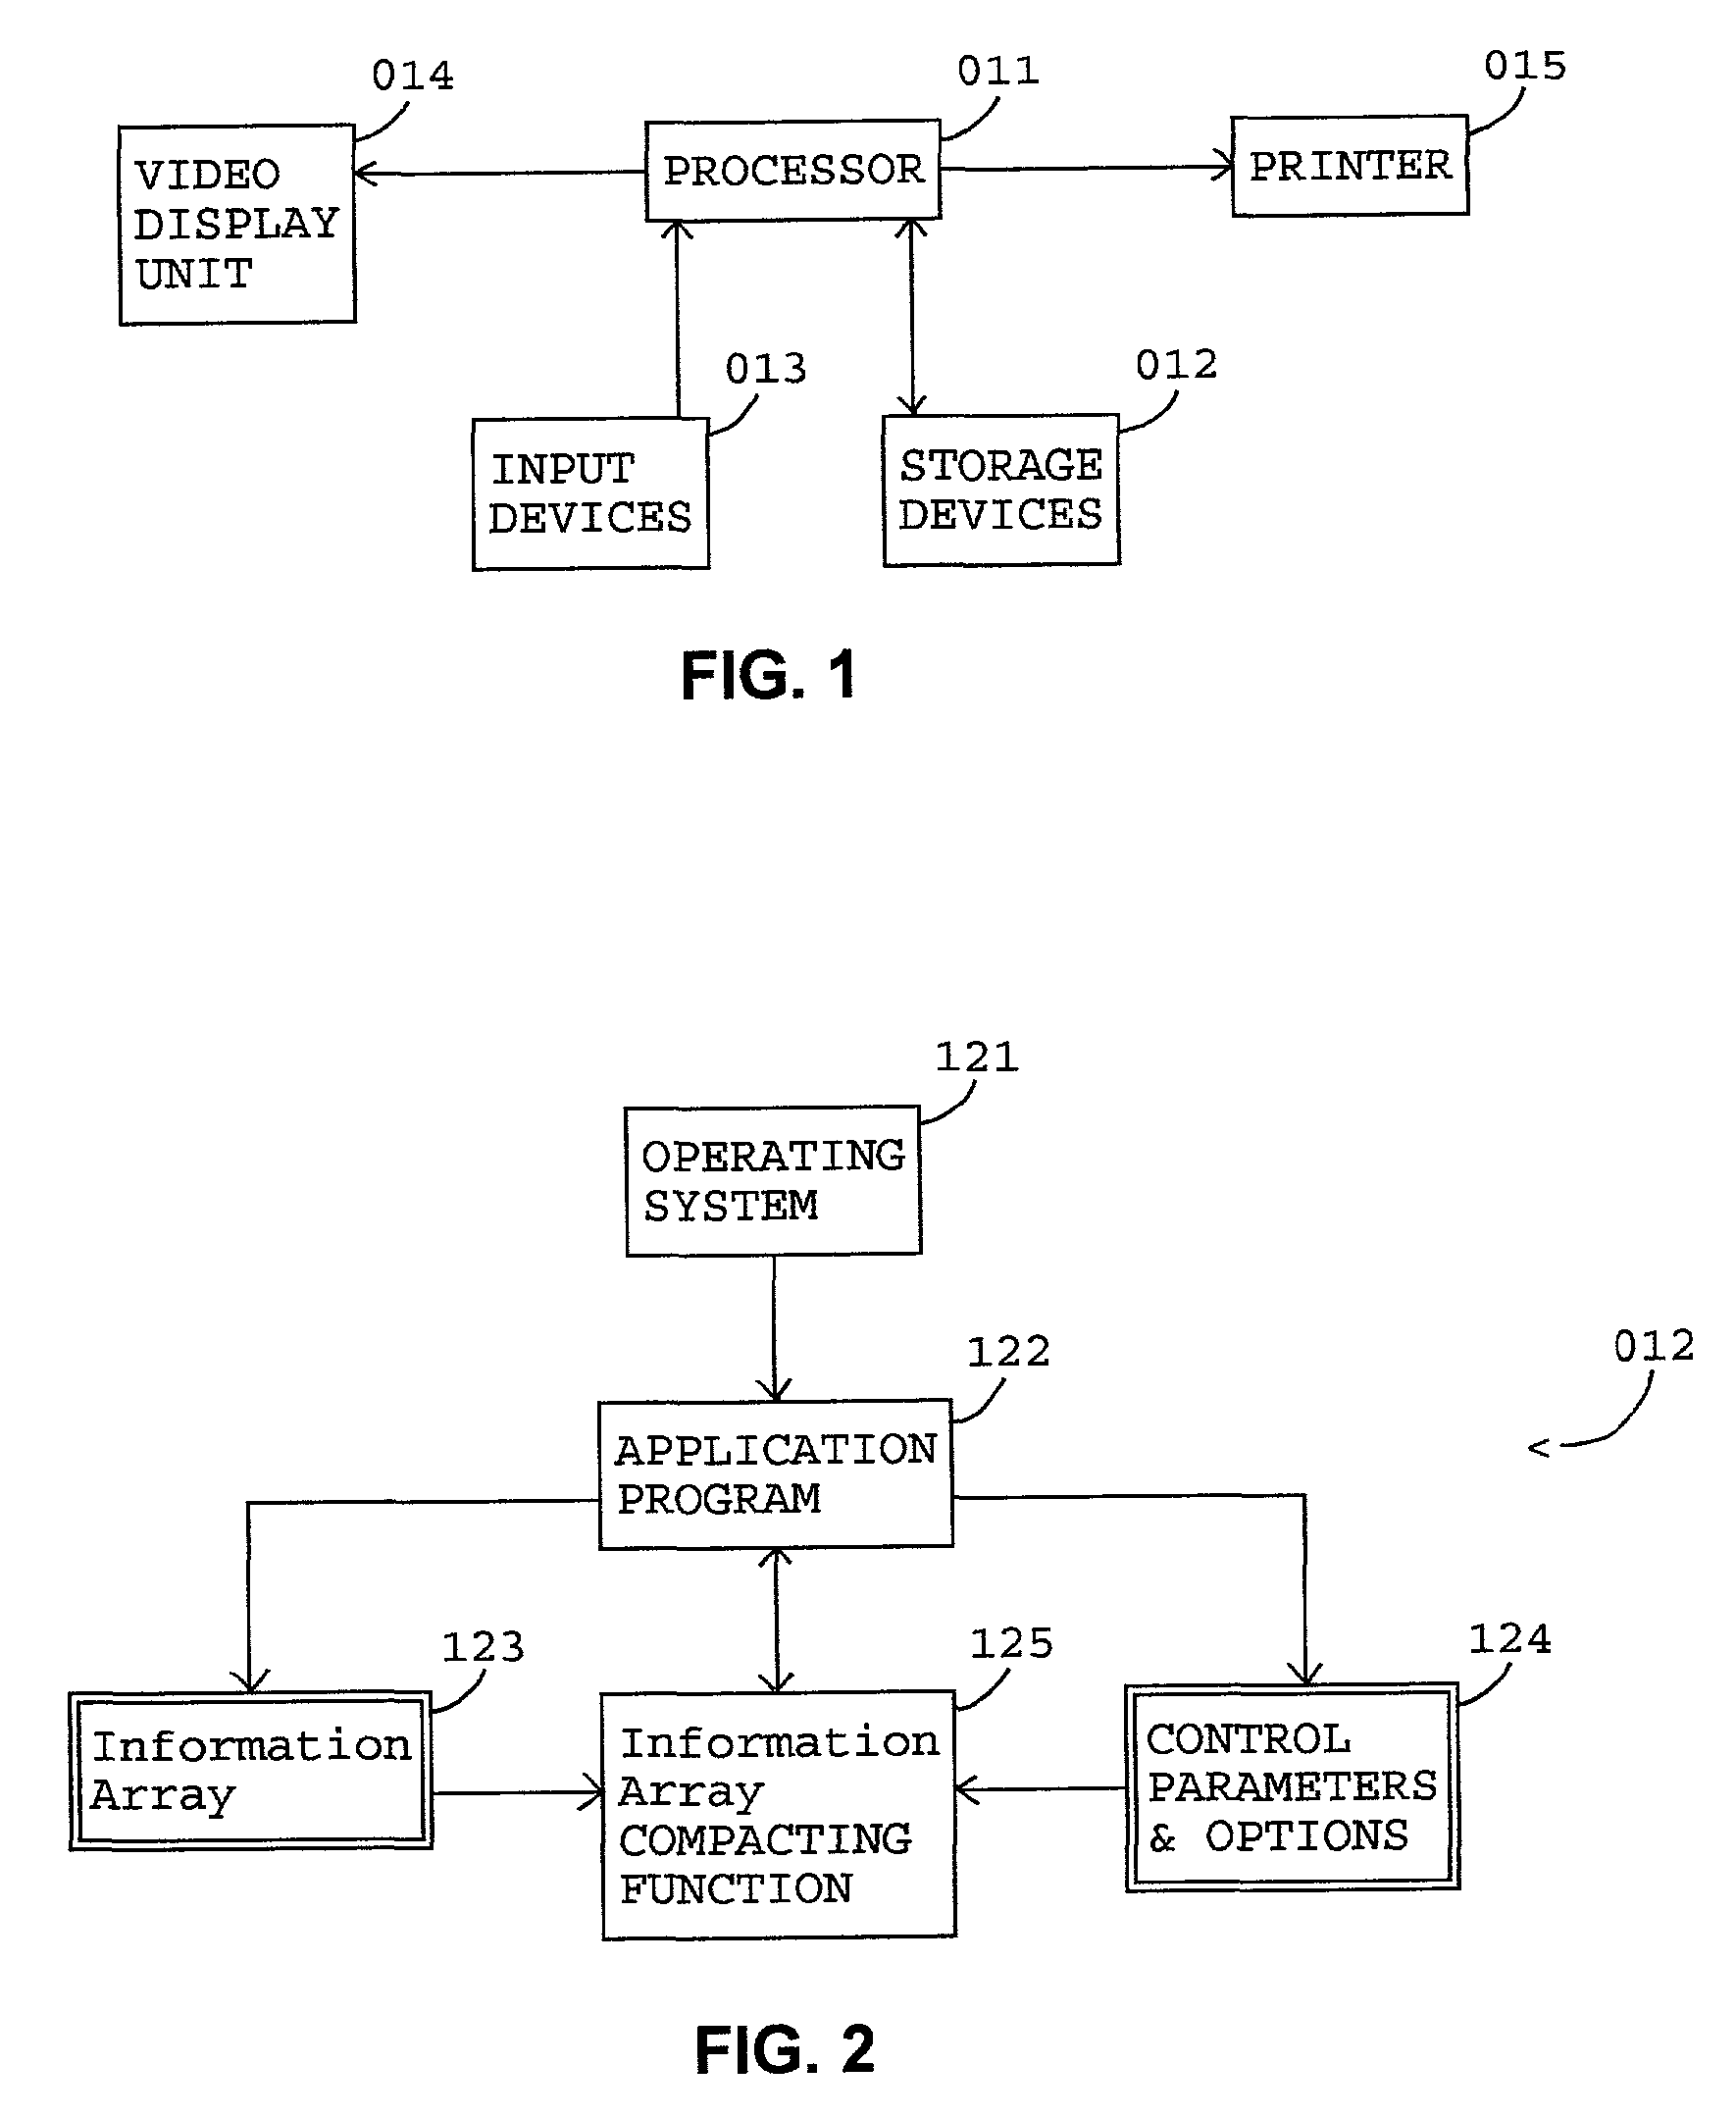 Compacting an information array display to cope with two dimensional display space constraint